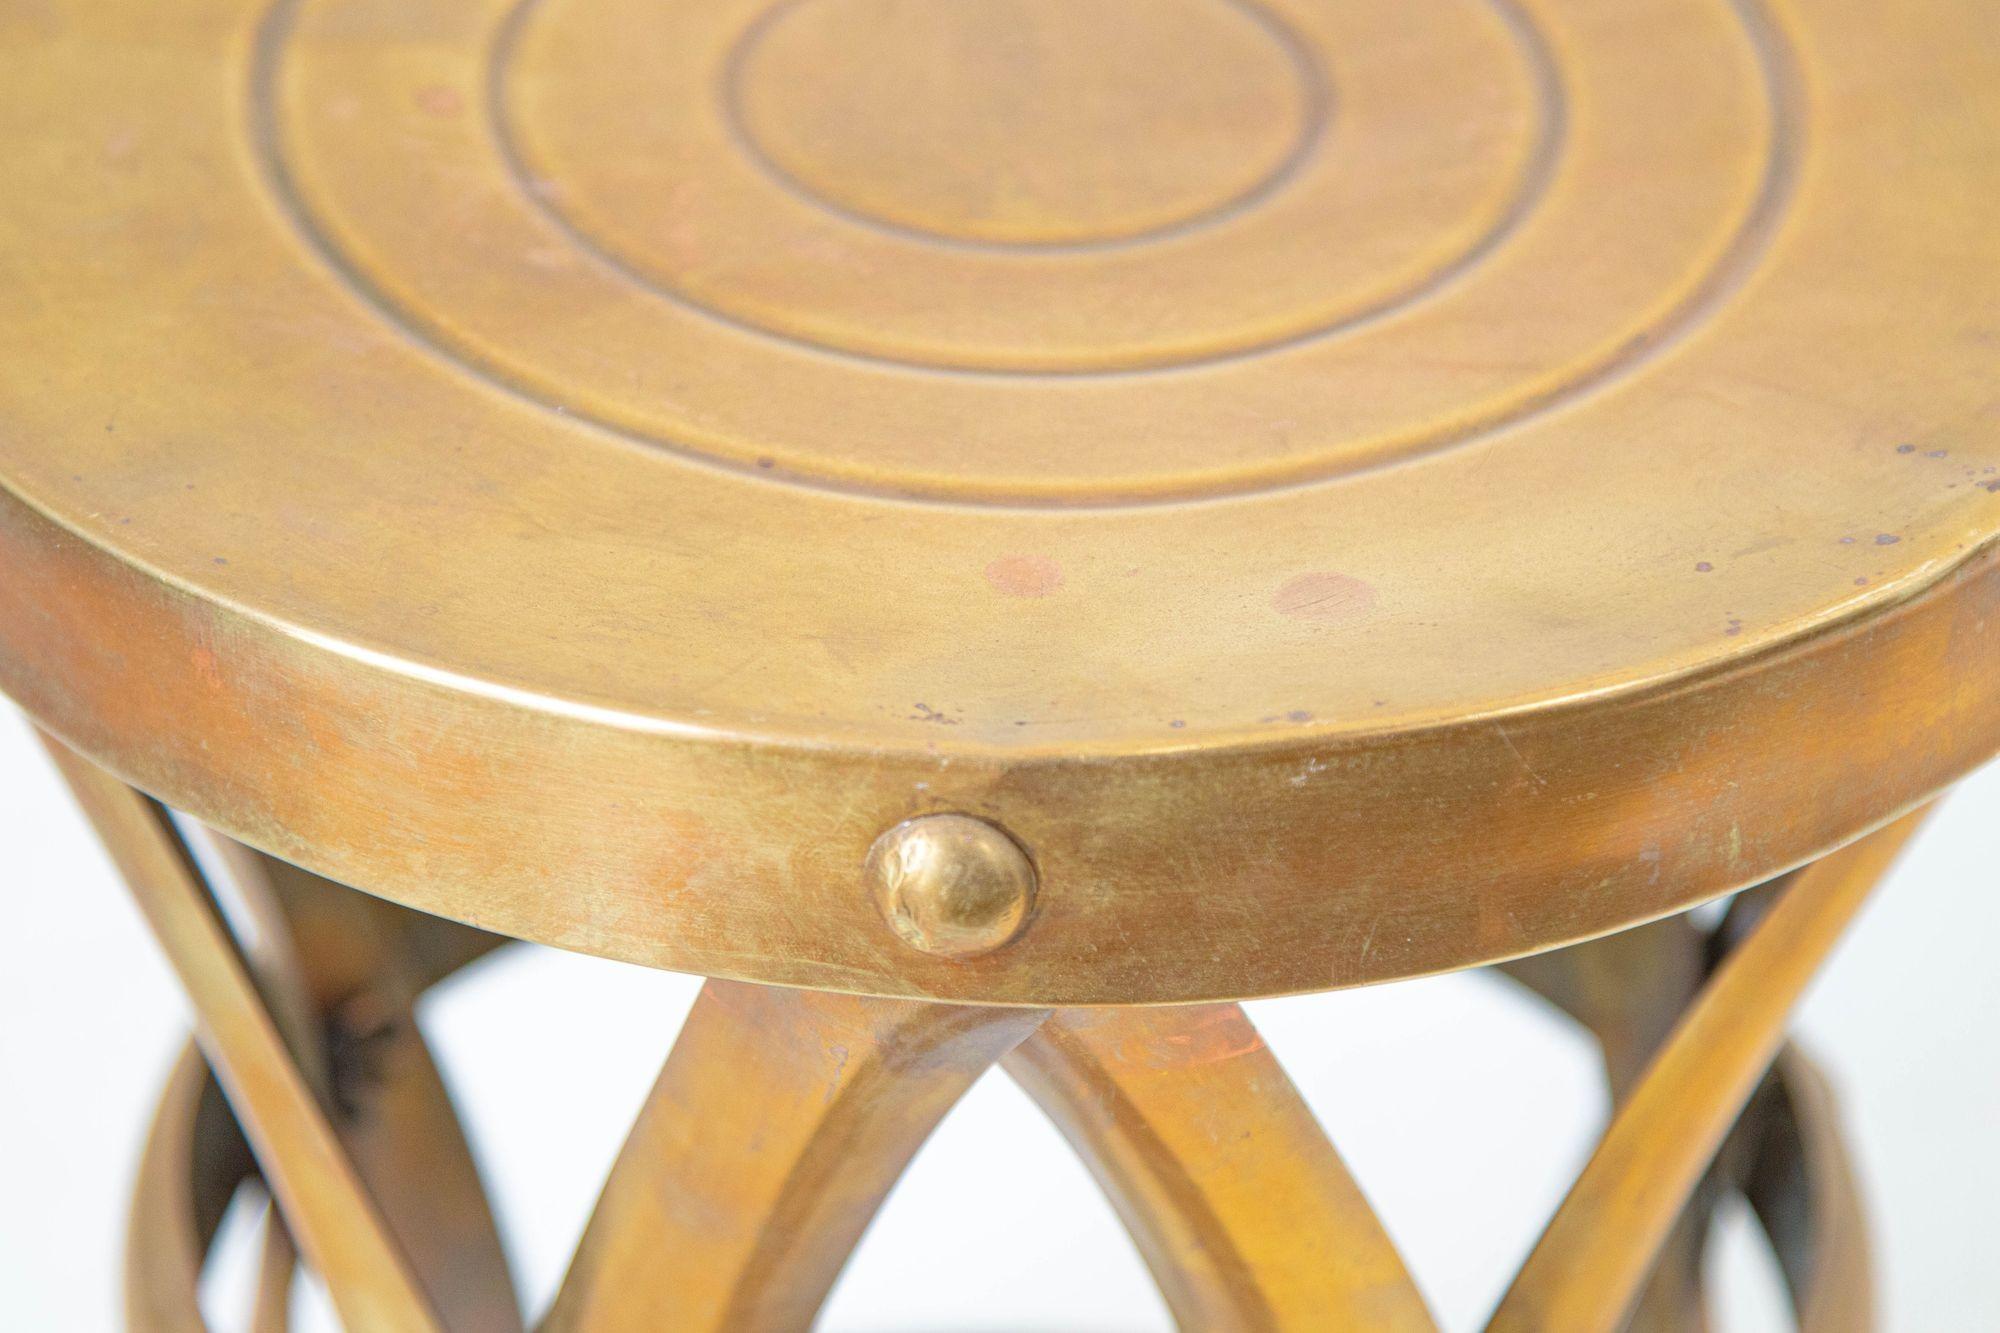 Midcentury Vintage Polished Brass Drum Stool or Side Table, 1960s For Sale 6